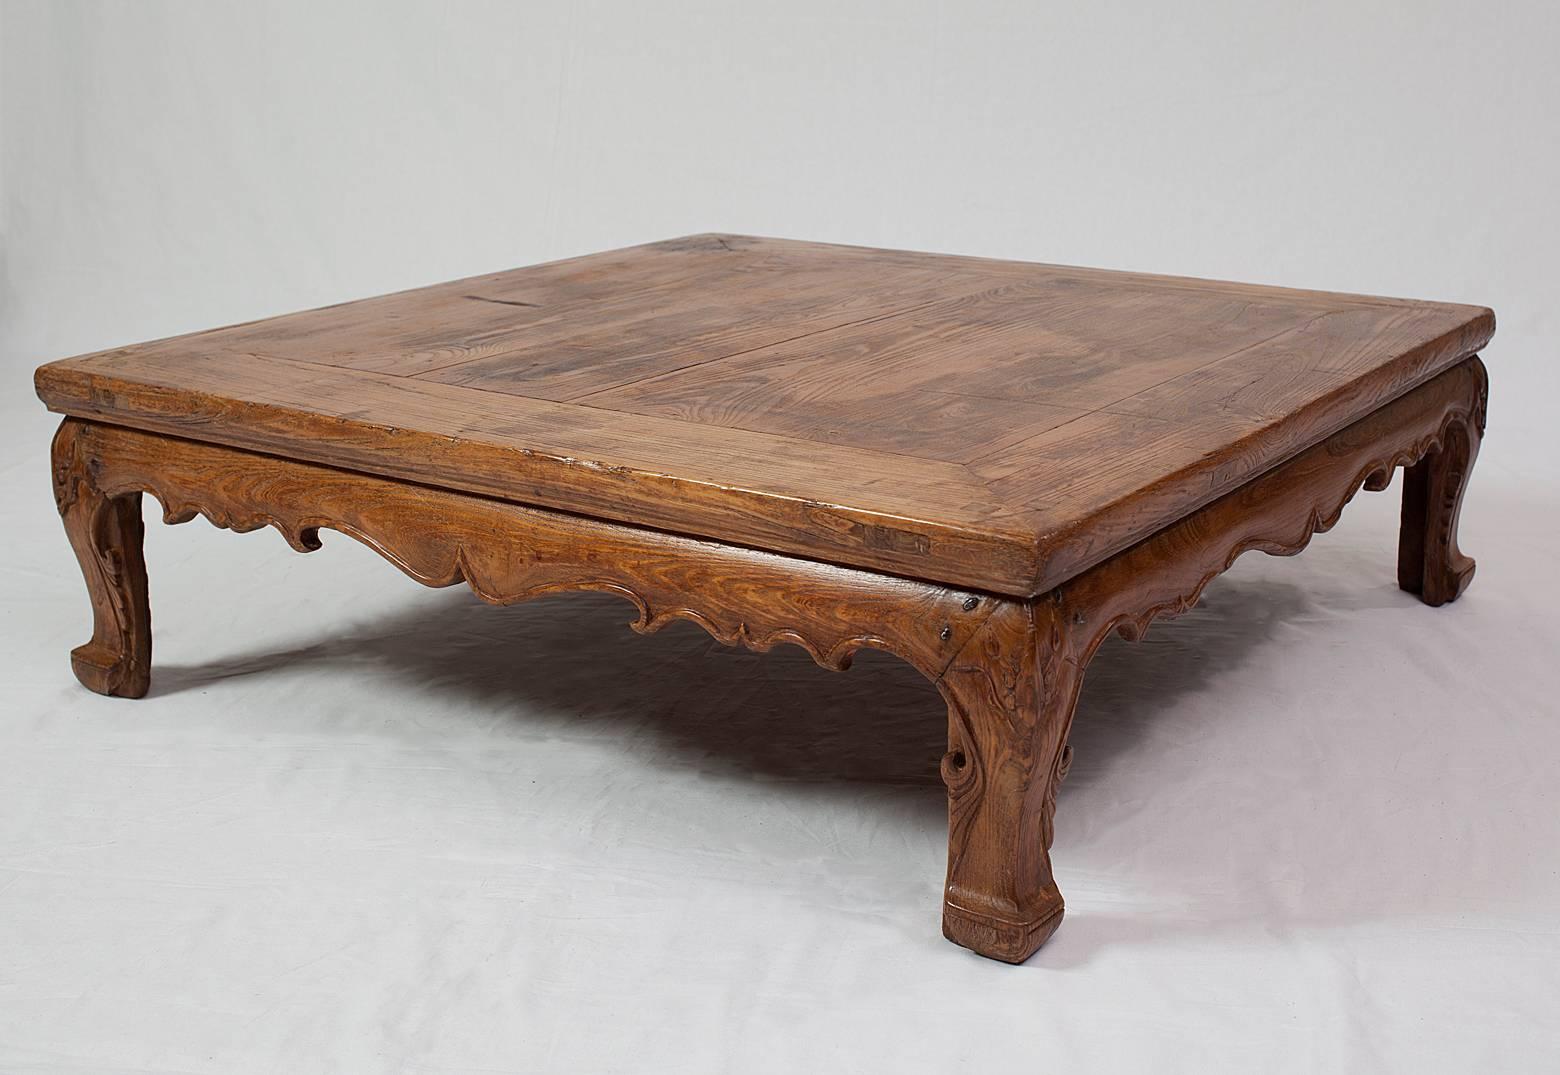 Carved Rare Qianlong Qing Dynasty Convertible Table with Four Stools 18th Century For Sale